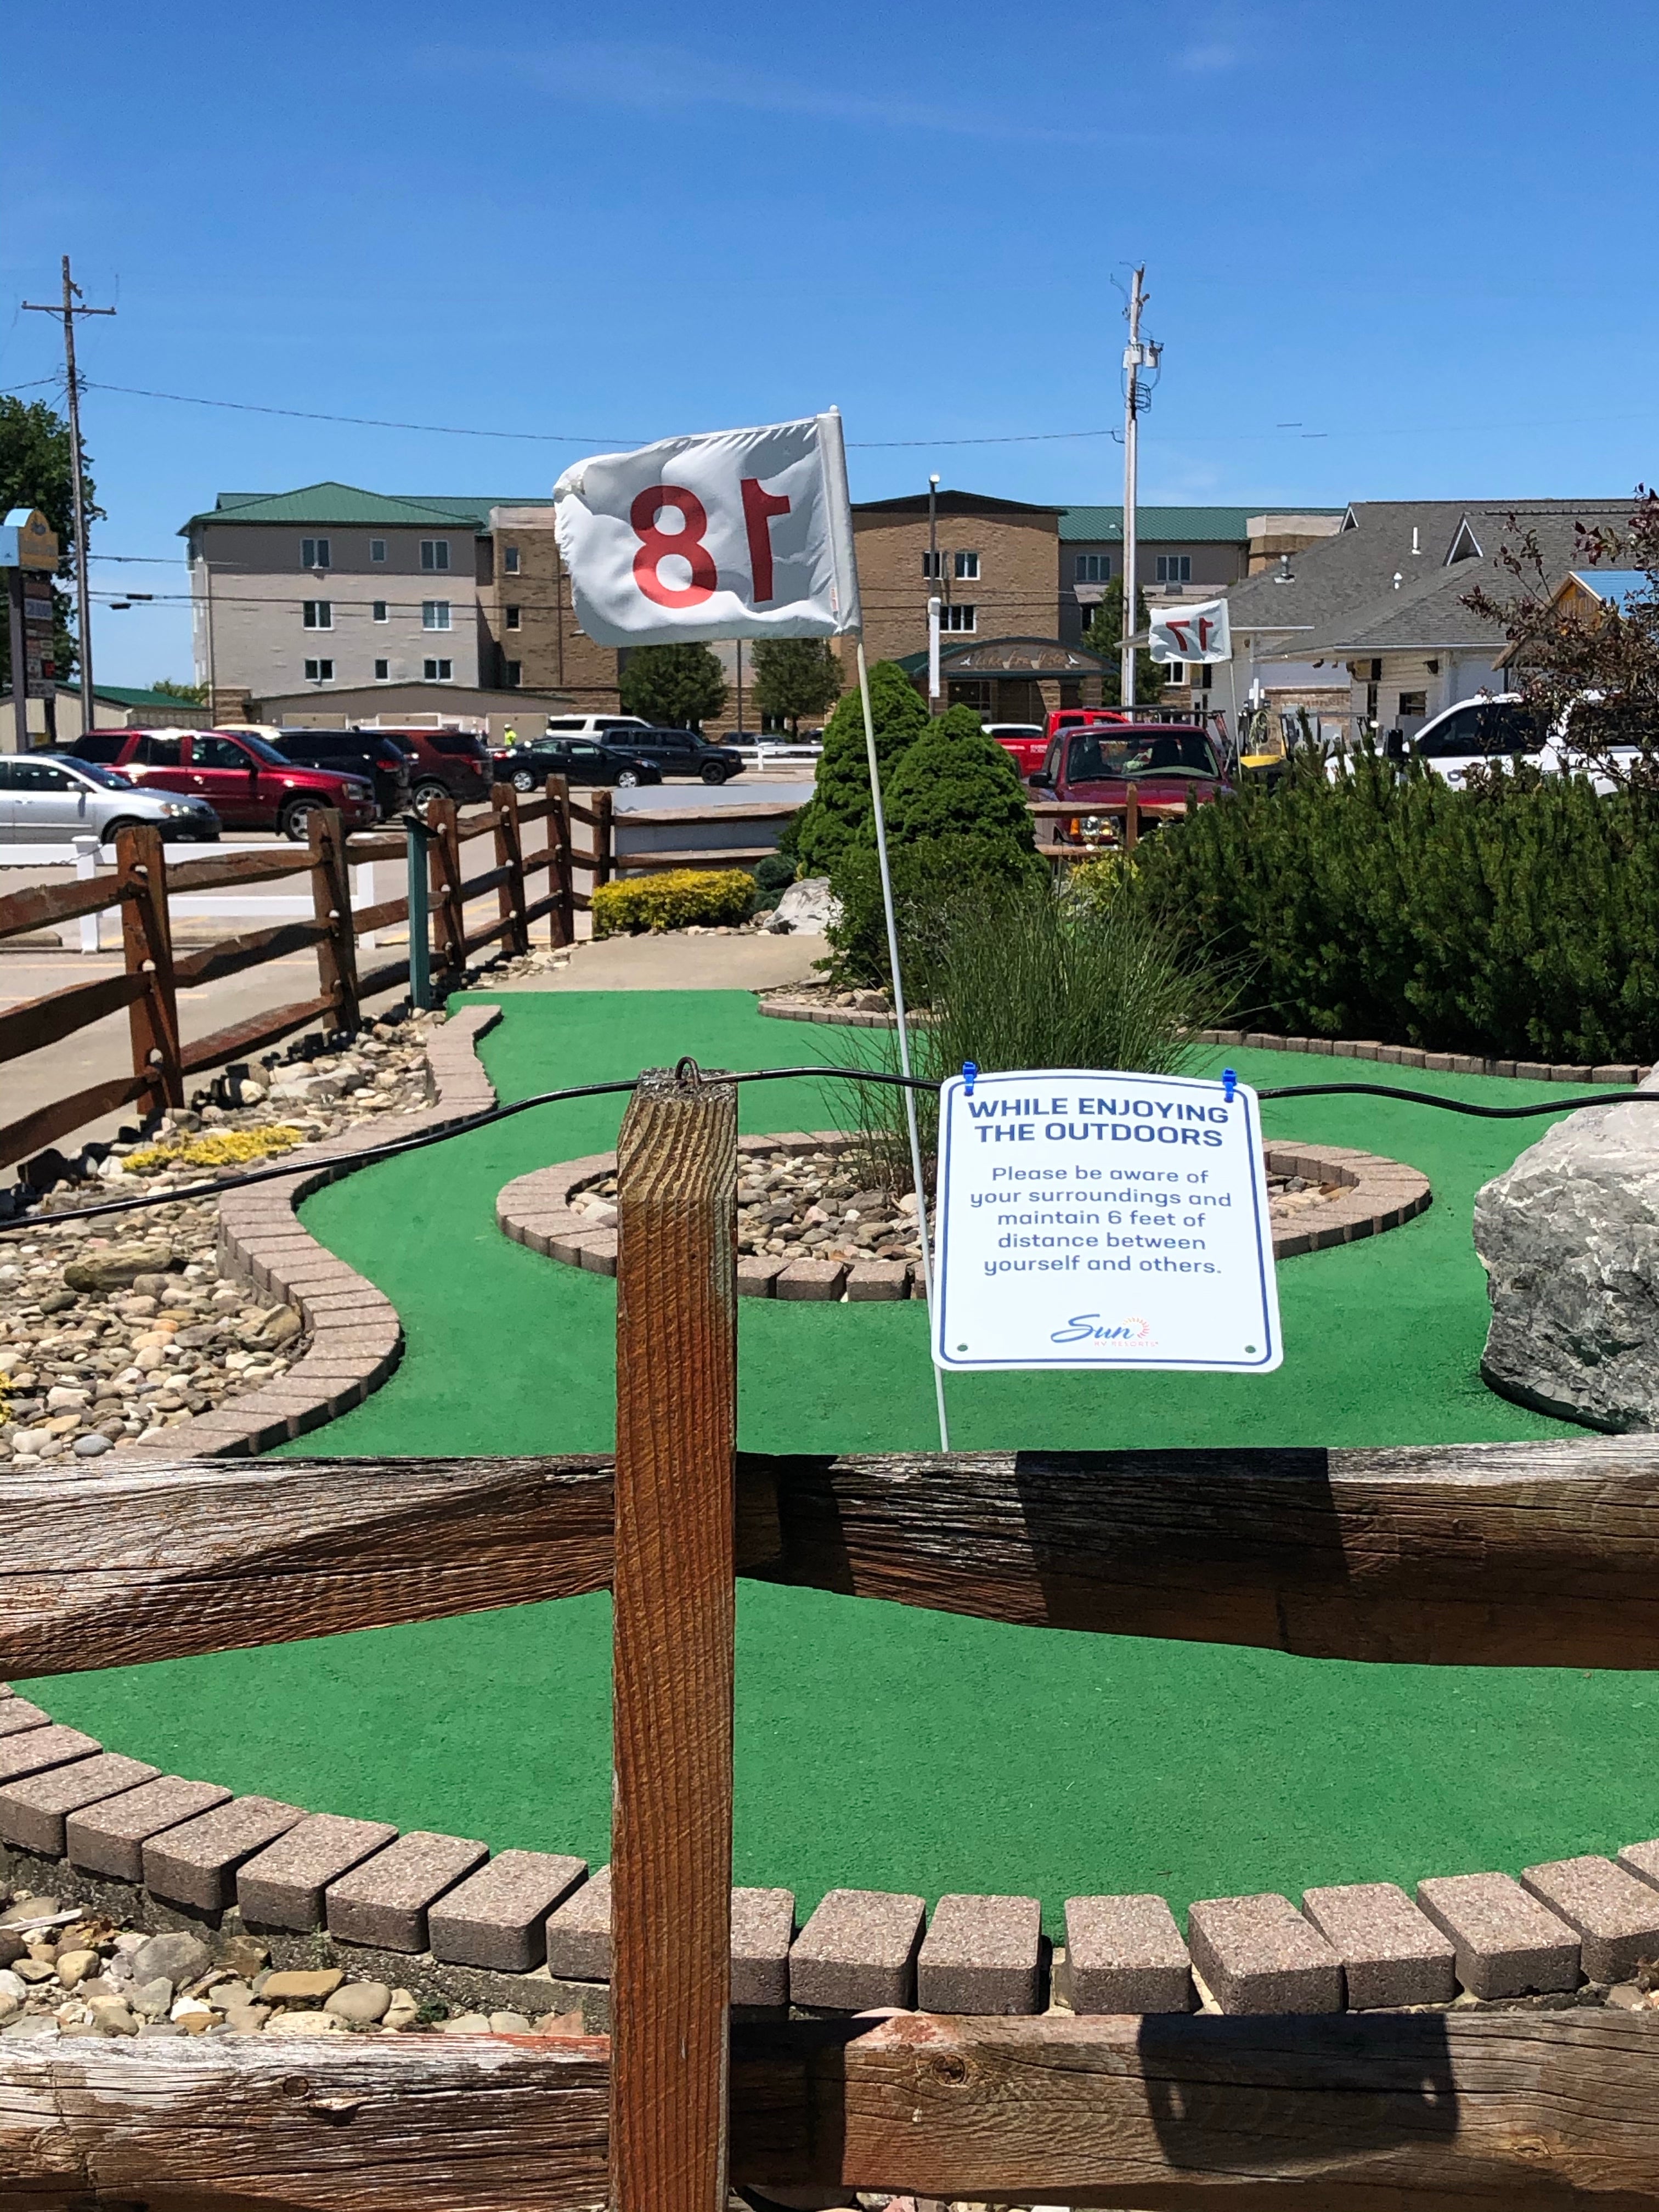 Mini-golf/Putt-Putt course with good sanitation and social distancing practices